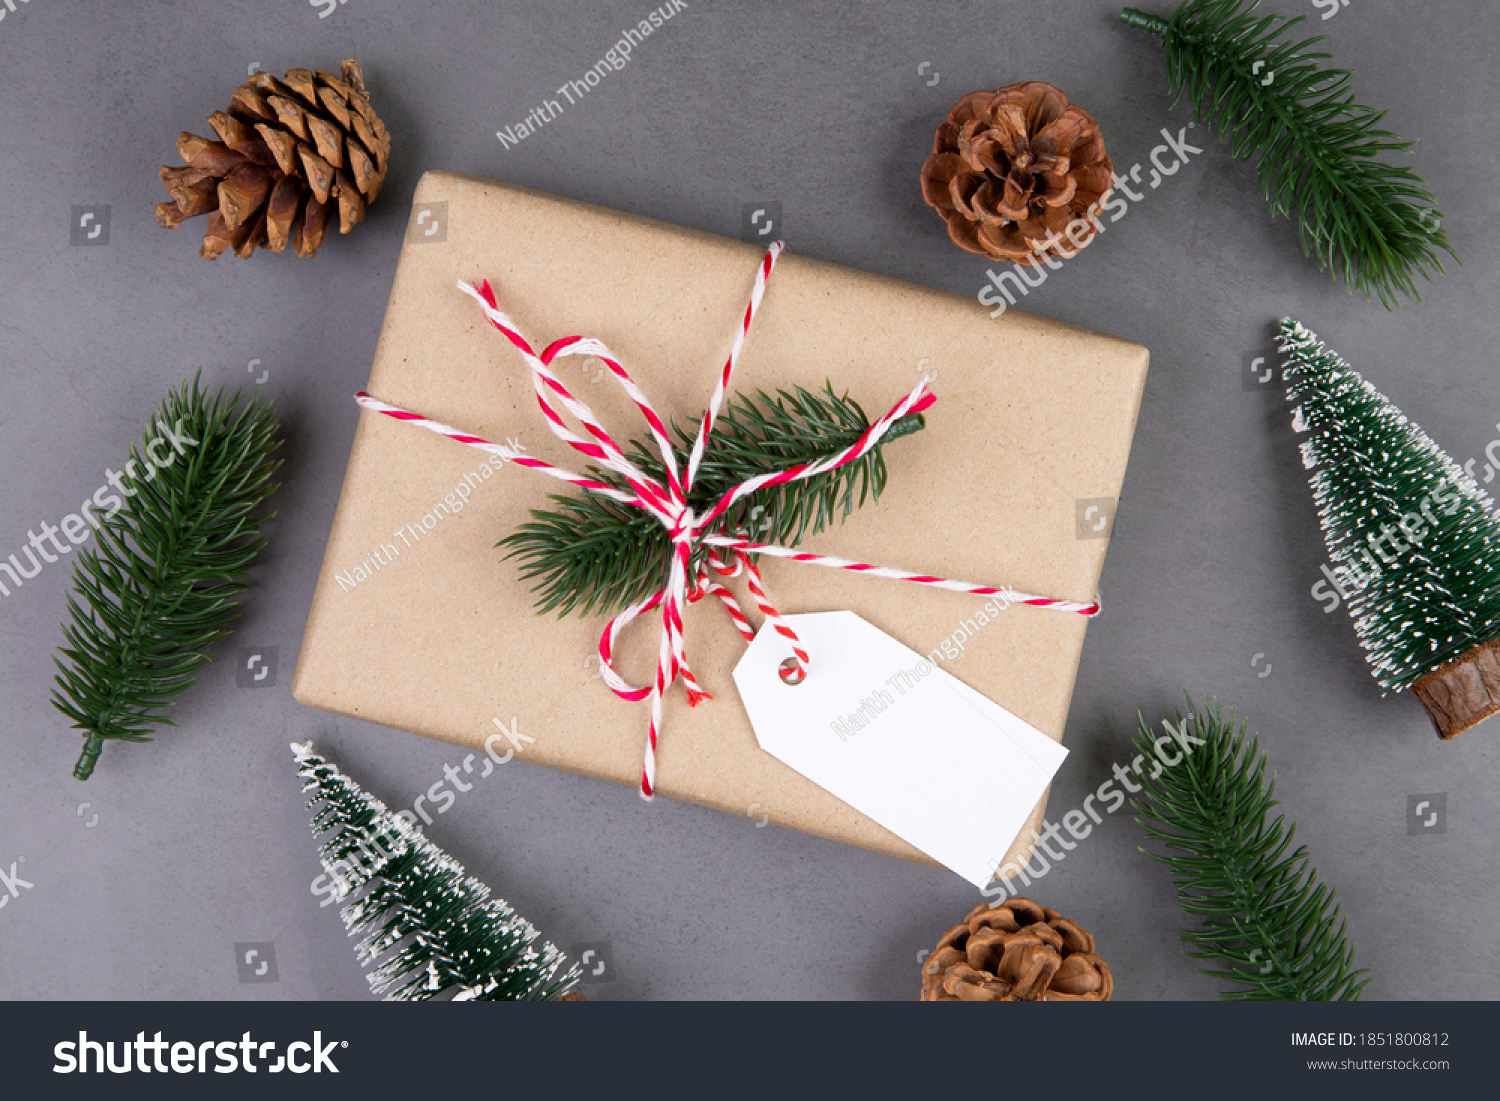 Christmas holiday composition with gift box having label decoration, new year and xmas or anniversary with presents having tag on cement floor background in season, top view or flat lay, copy space. #1851800812